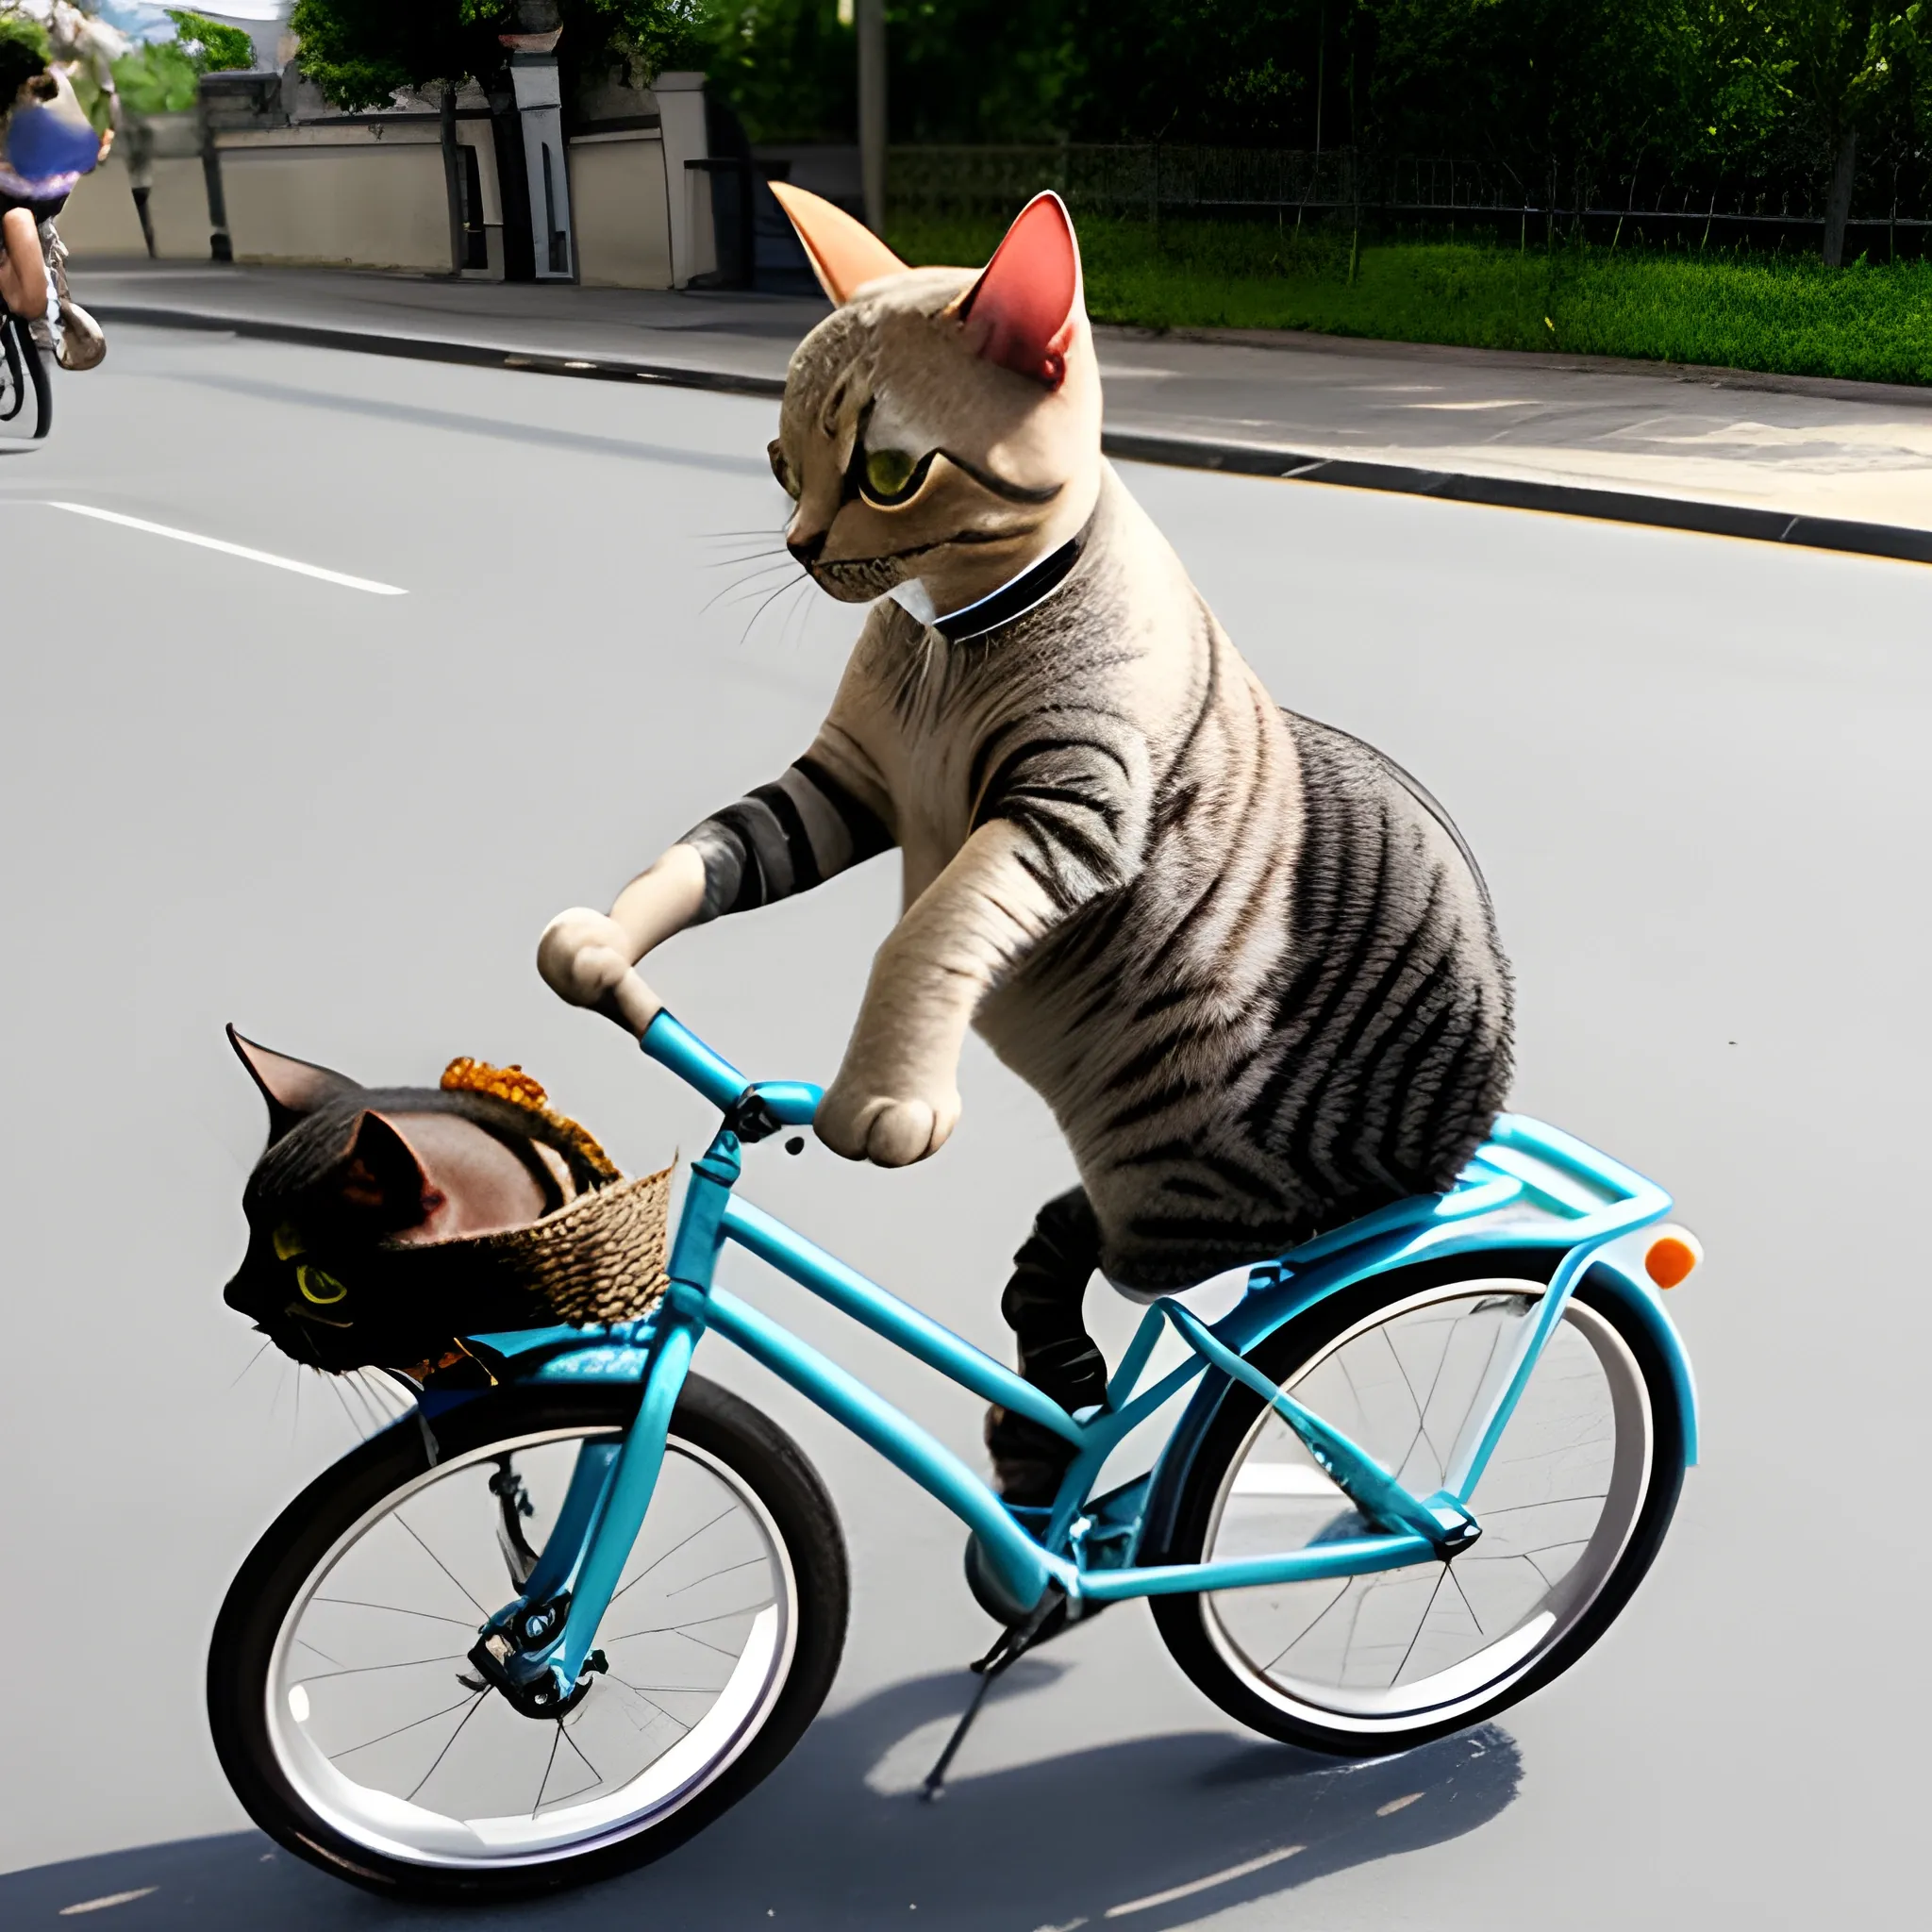 a cat ride a bicycle
